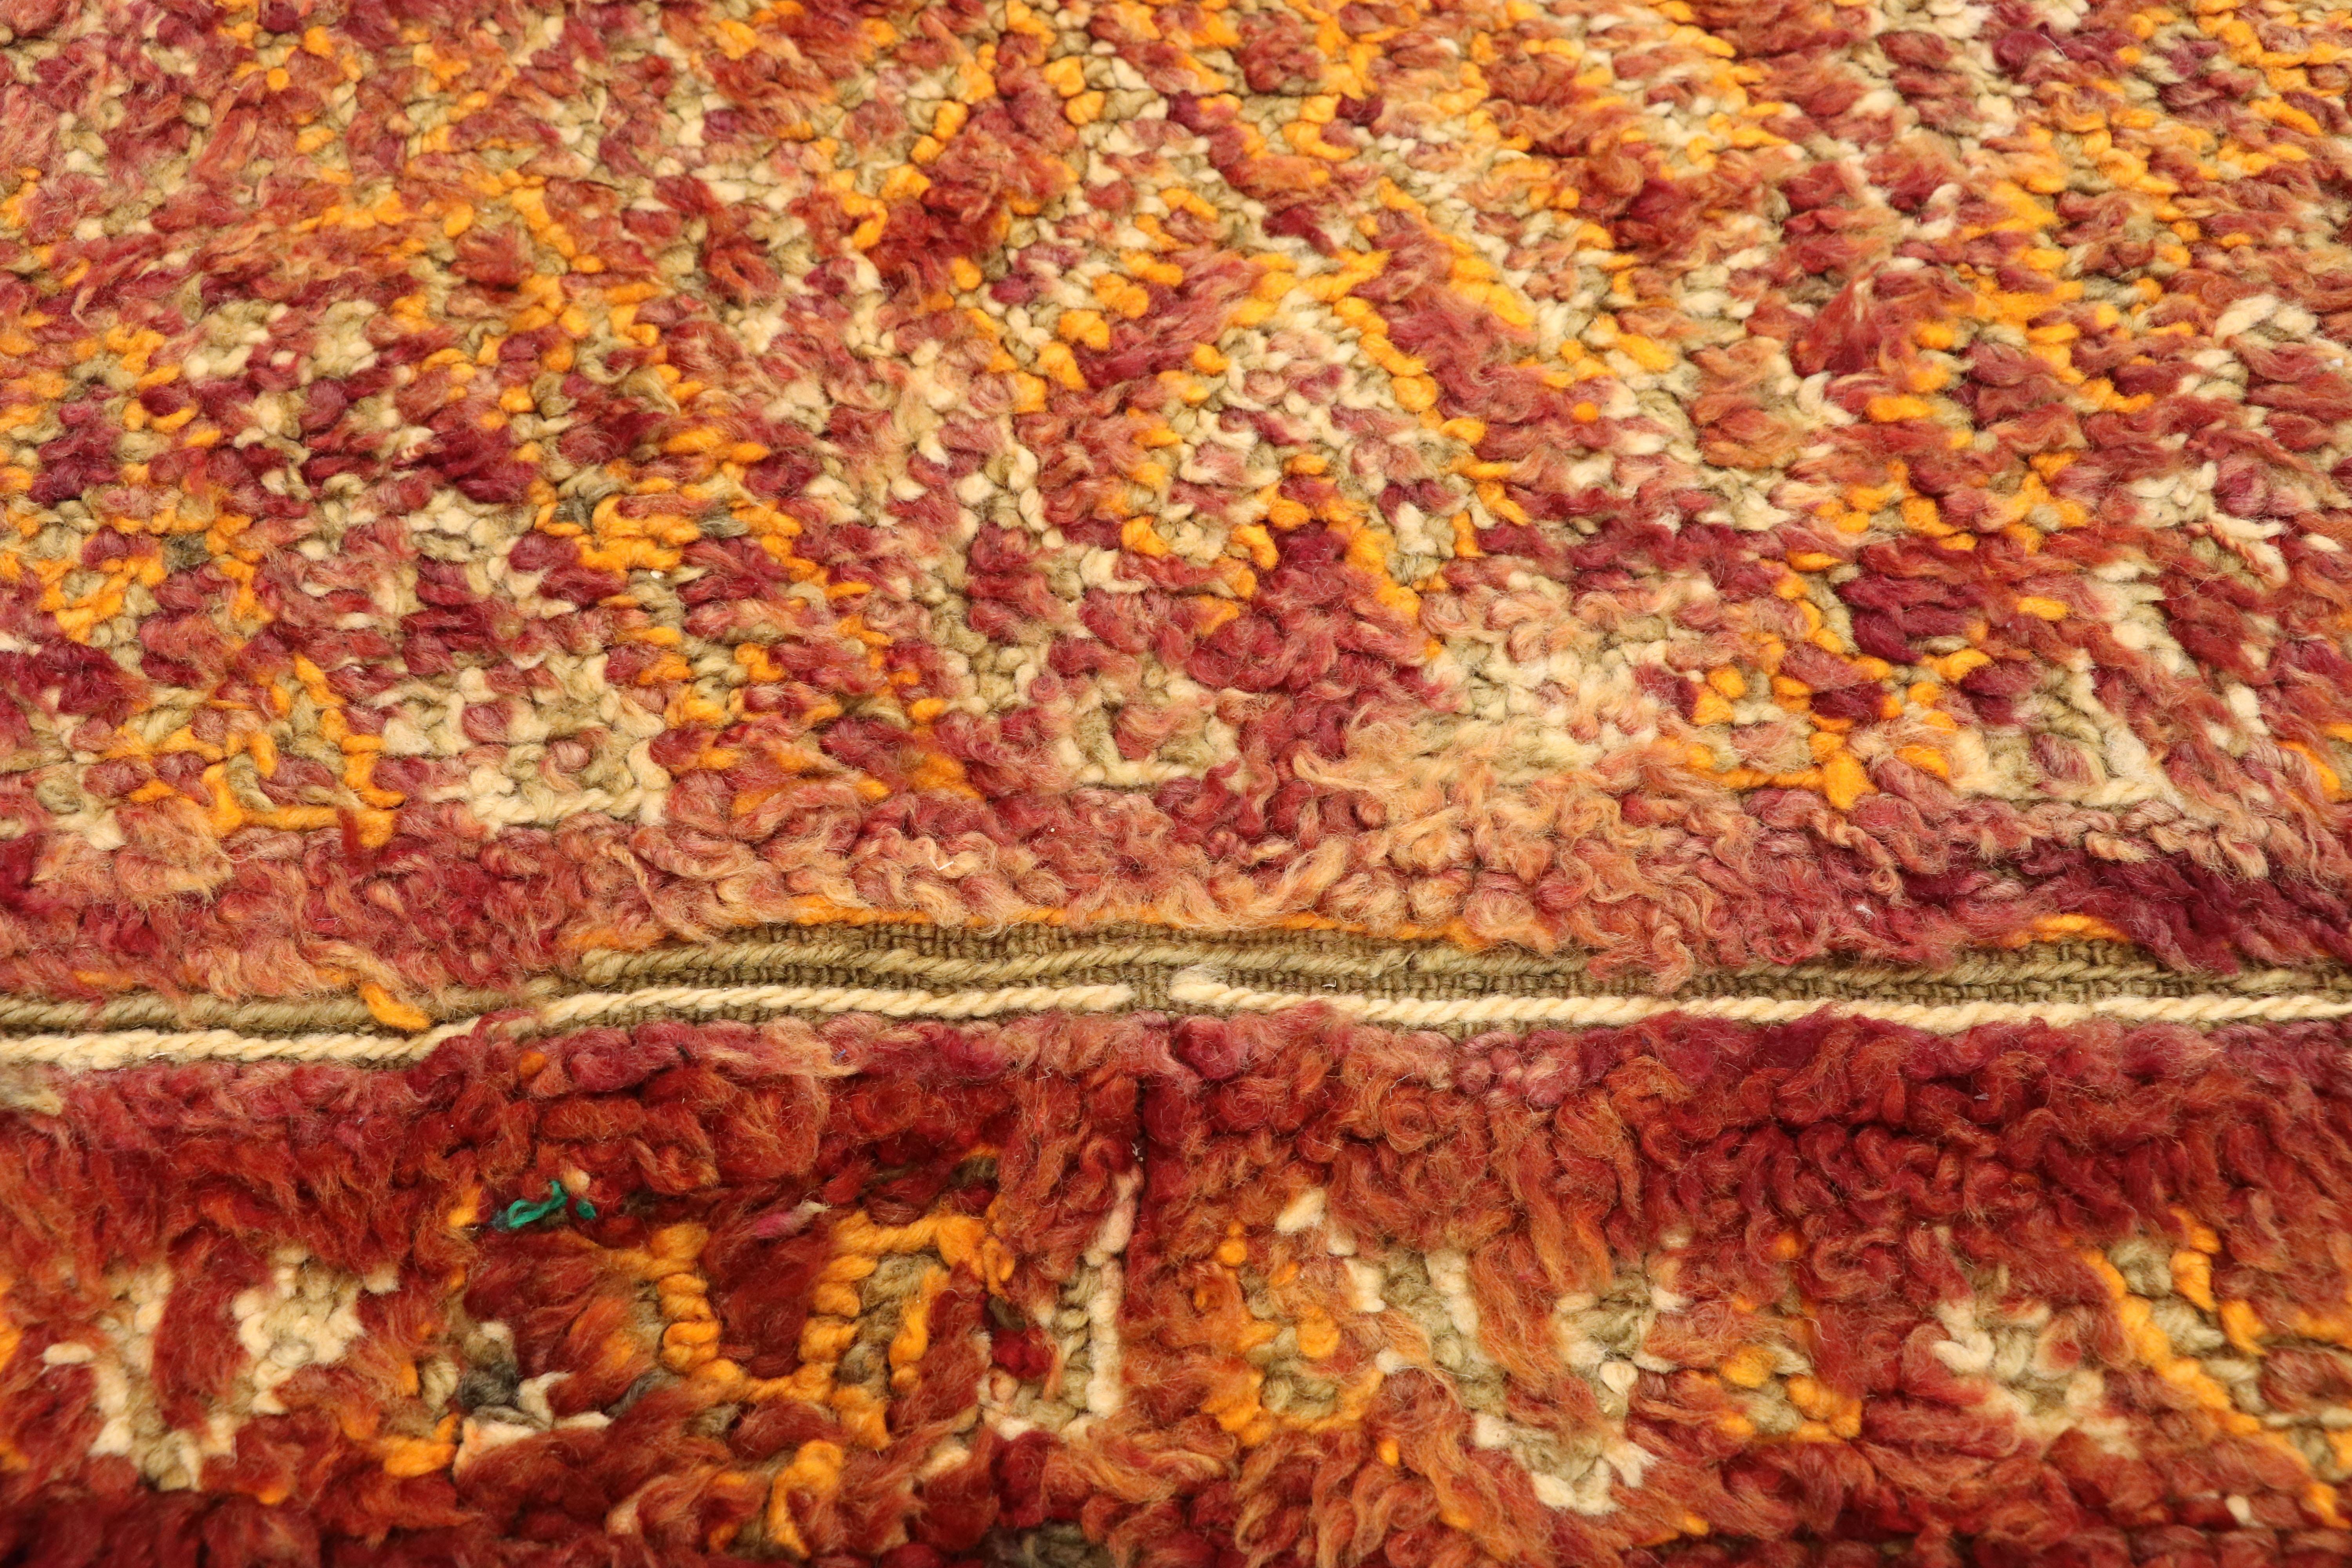 Hand-Knotted Vintage Beni M'Guild Moroccan Rug with a Diamond Pattern in Warm, Spicy Hues